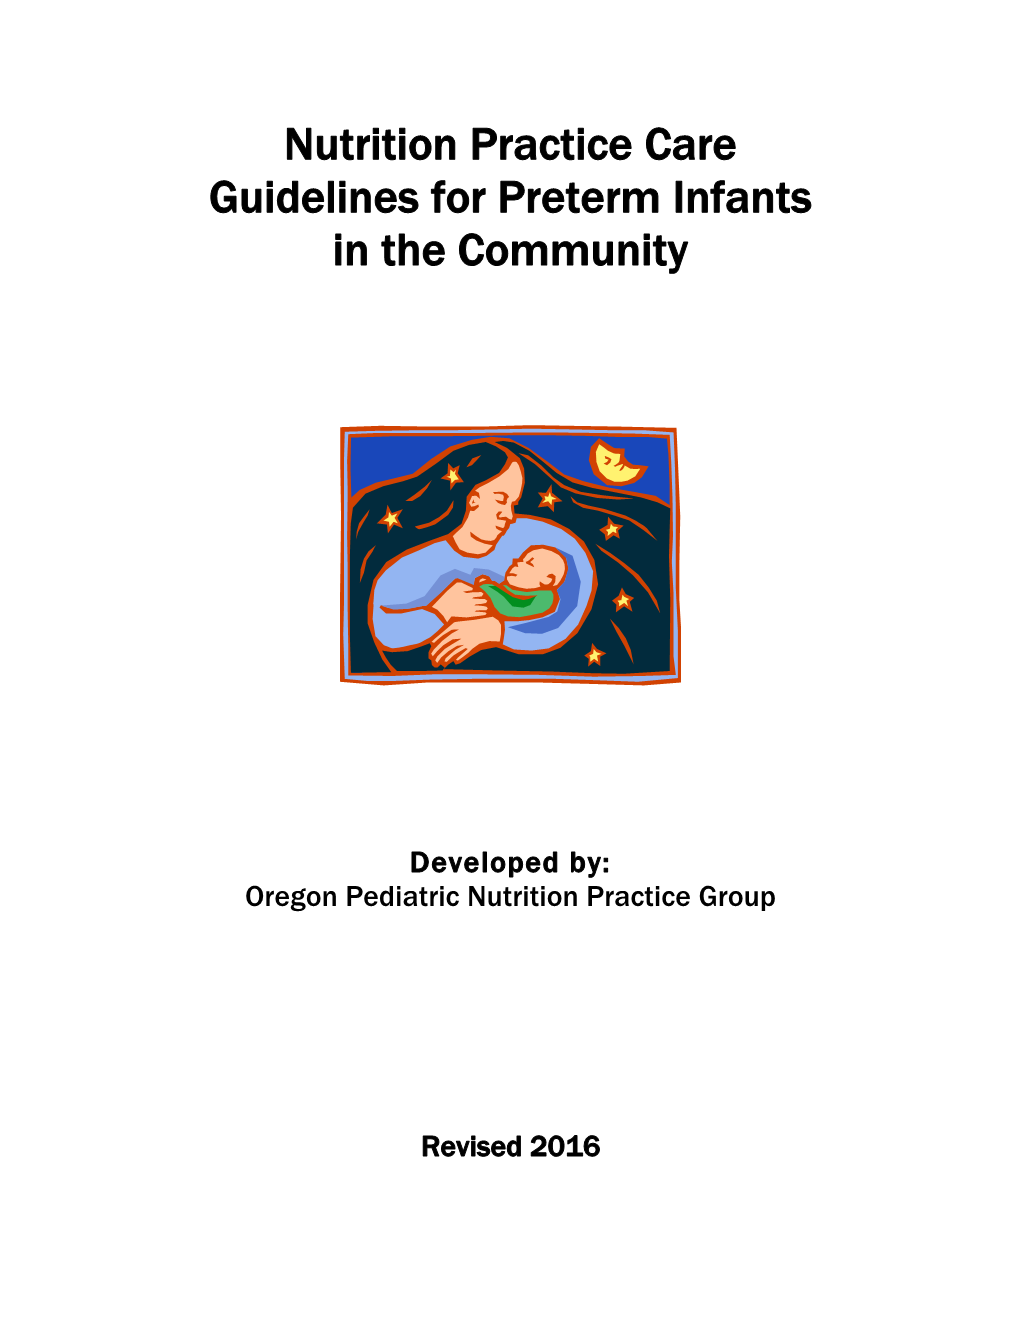 Nutrition Practice Care Guidelines for Preterm Infants in the Community